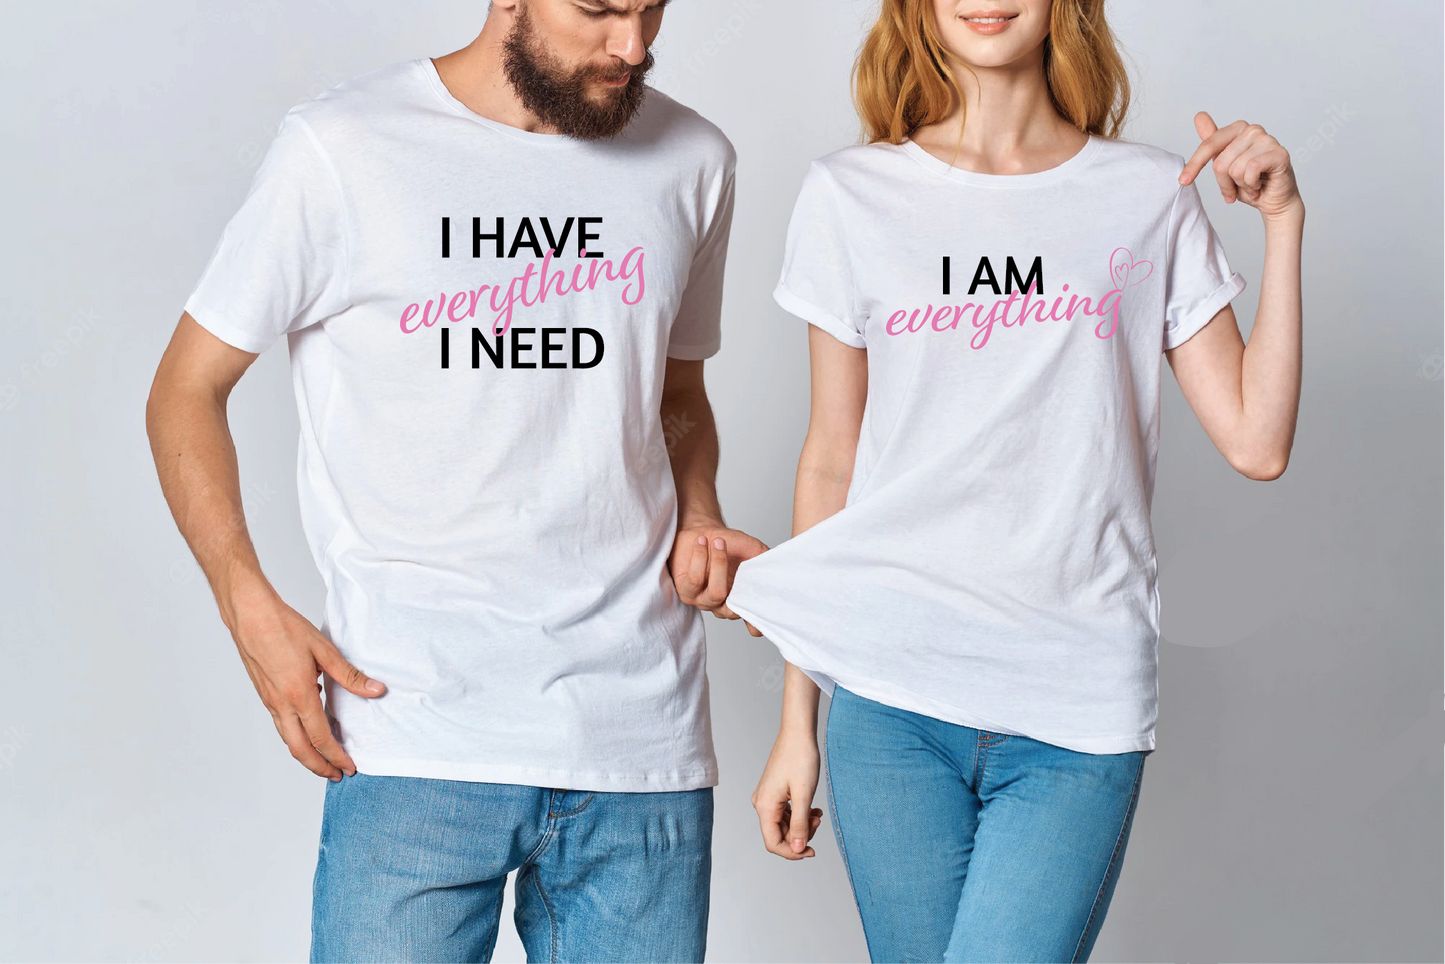 His & Her  T-Shirt Set